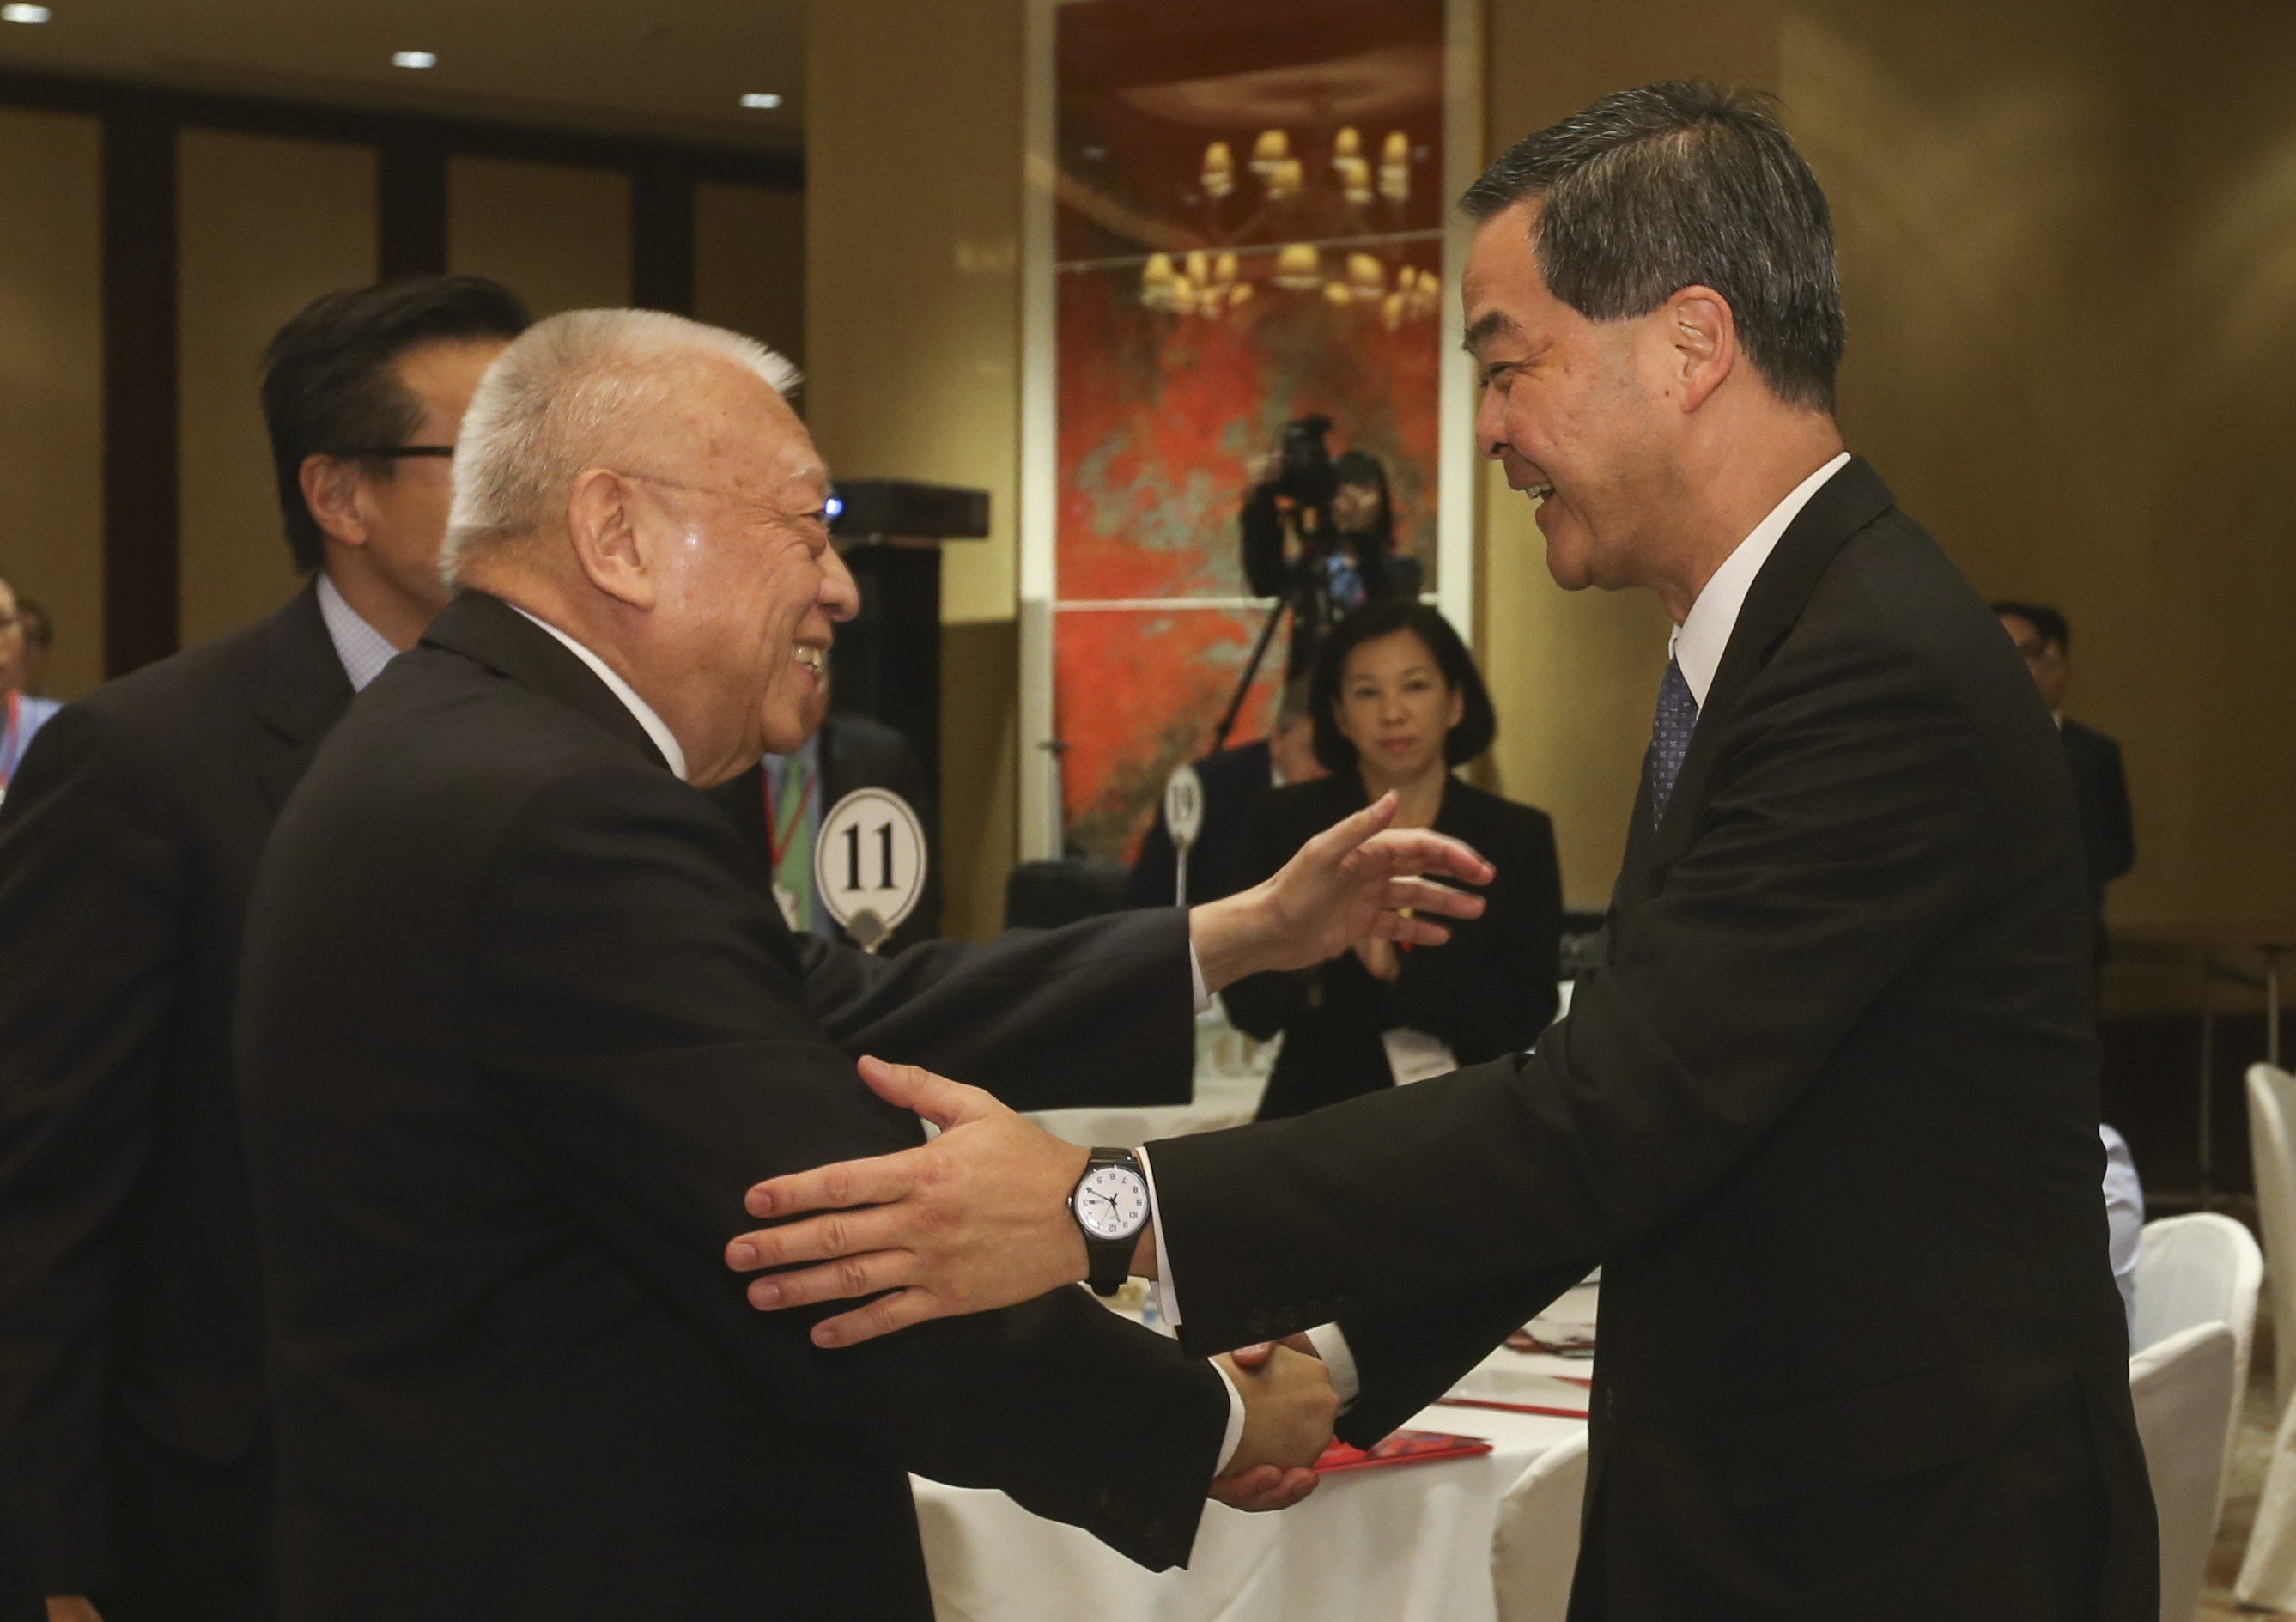 Former Hong Kong chief executive Tung Chee-hwa (left) shaking hands with incumbent chief executive Leung Chun-ying at the forum at the Conrad Hotel in Admiralty on Monday. Photo: K. Y. Cheng